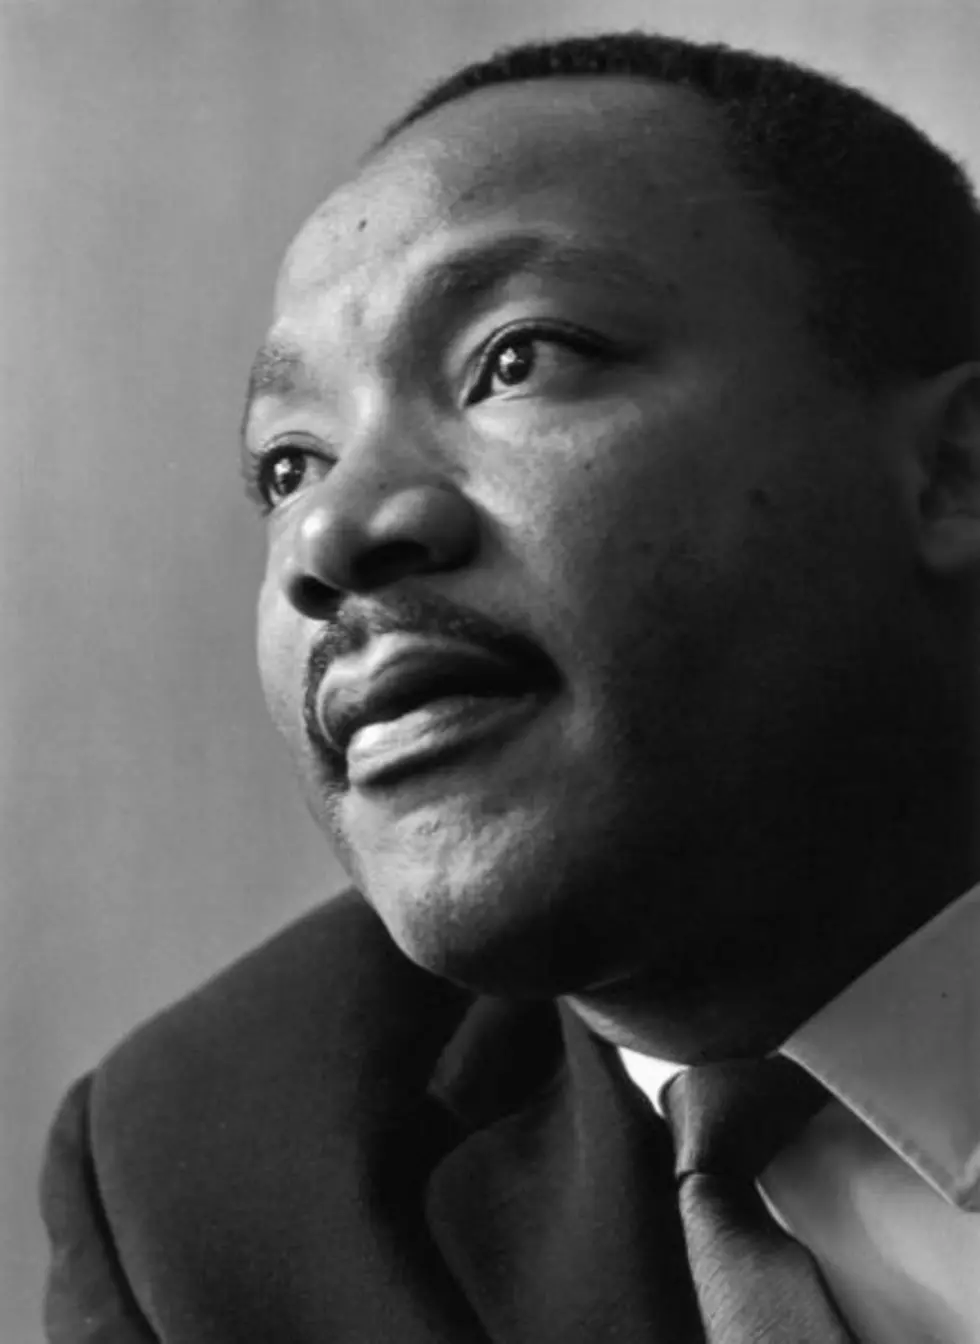 Remembering Martin Luther King, Jr.&#8217;s &#8220;I Have a Dream&#8221; [VIDEO]